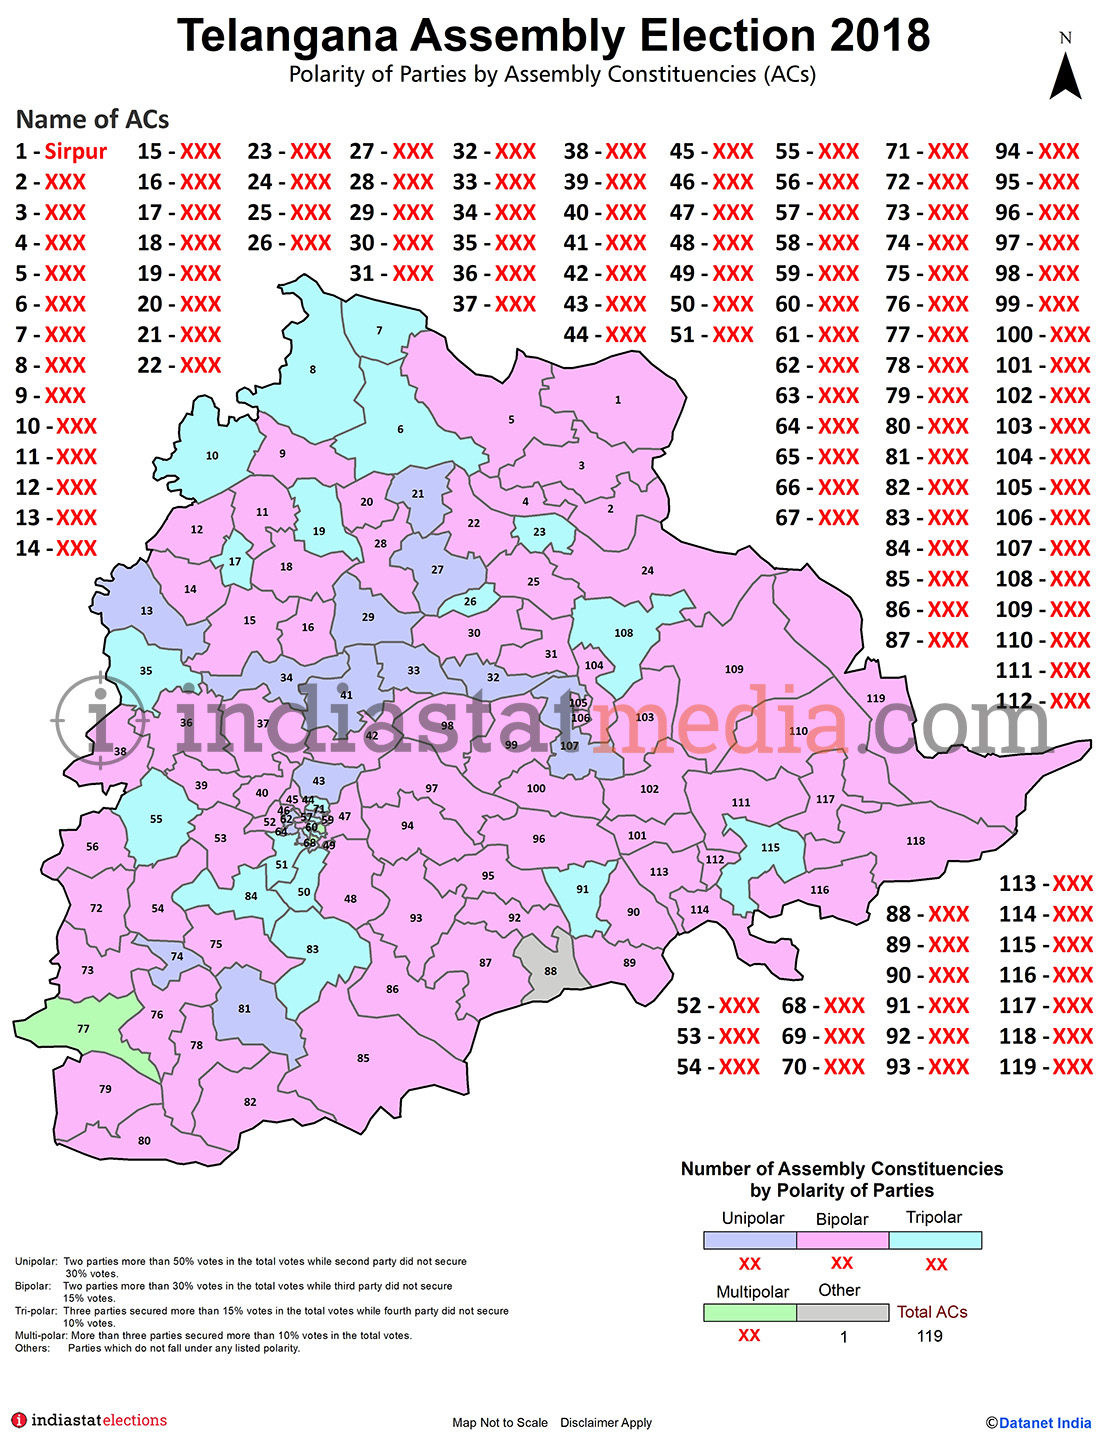 Polarity of Parties by Assembly Constituencies in Telangana (Assembly Election - 2018)